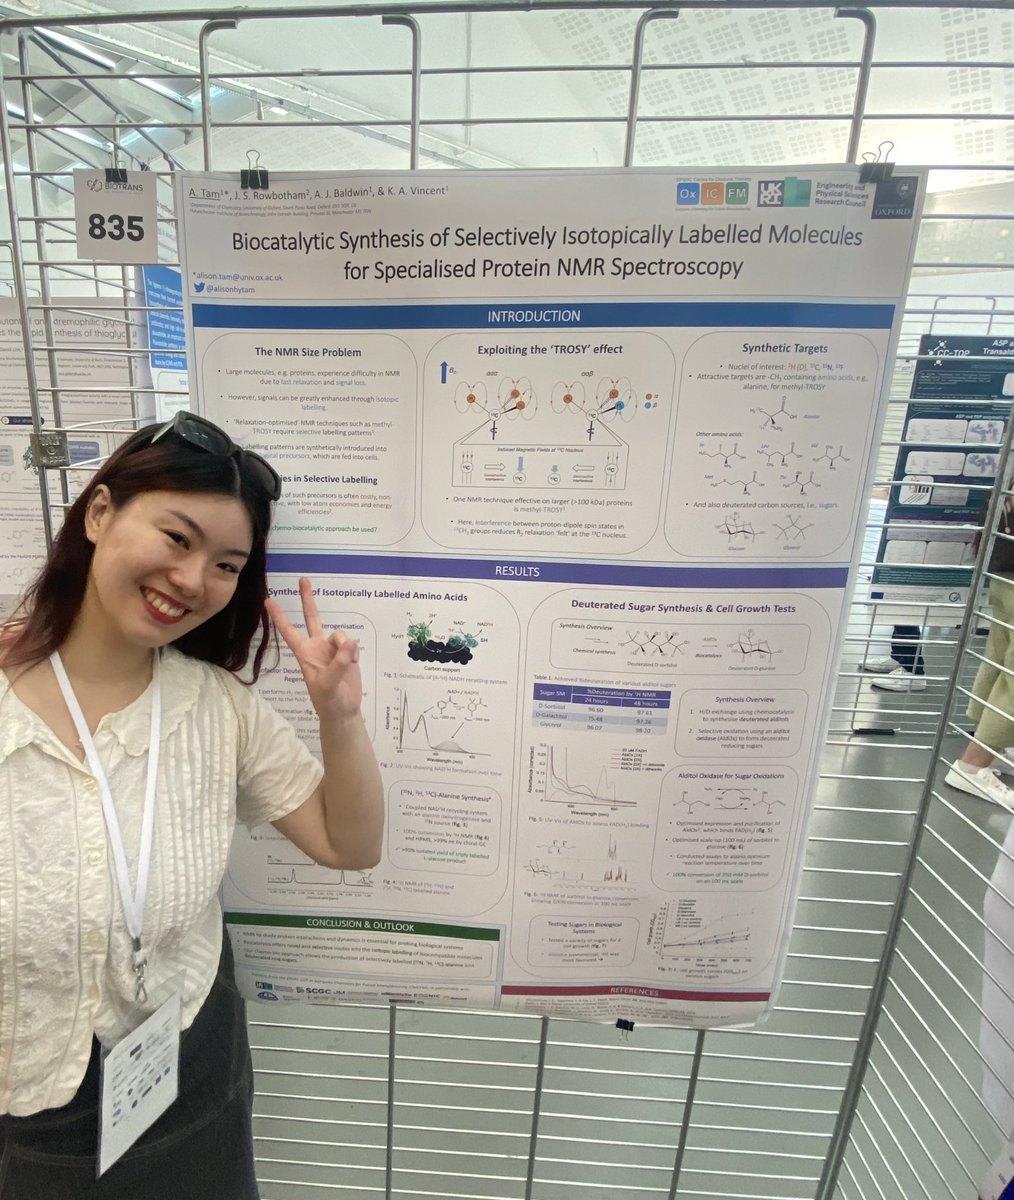 Thanks for all the great discussions today at #biotrans2023 🫶🏻! If you’re also interested in isotopic labelling using deuterated cofactor recycling systems,  come by and check out my poster at slot 835 😆 @vincentgroupox